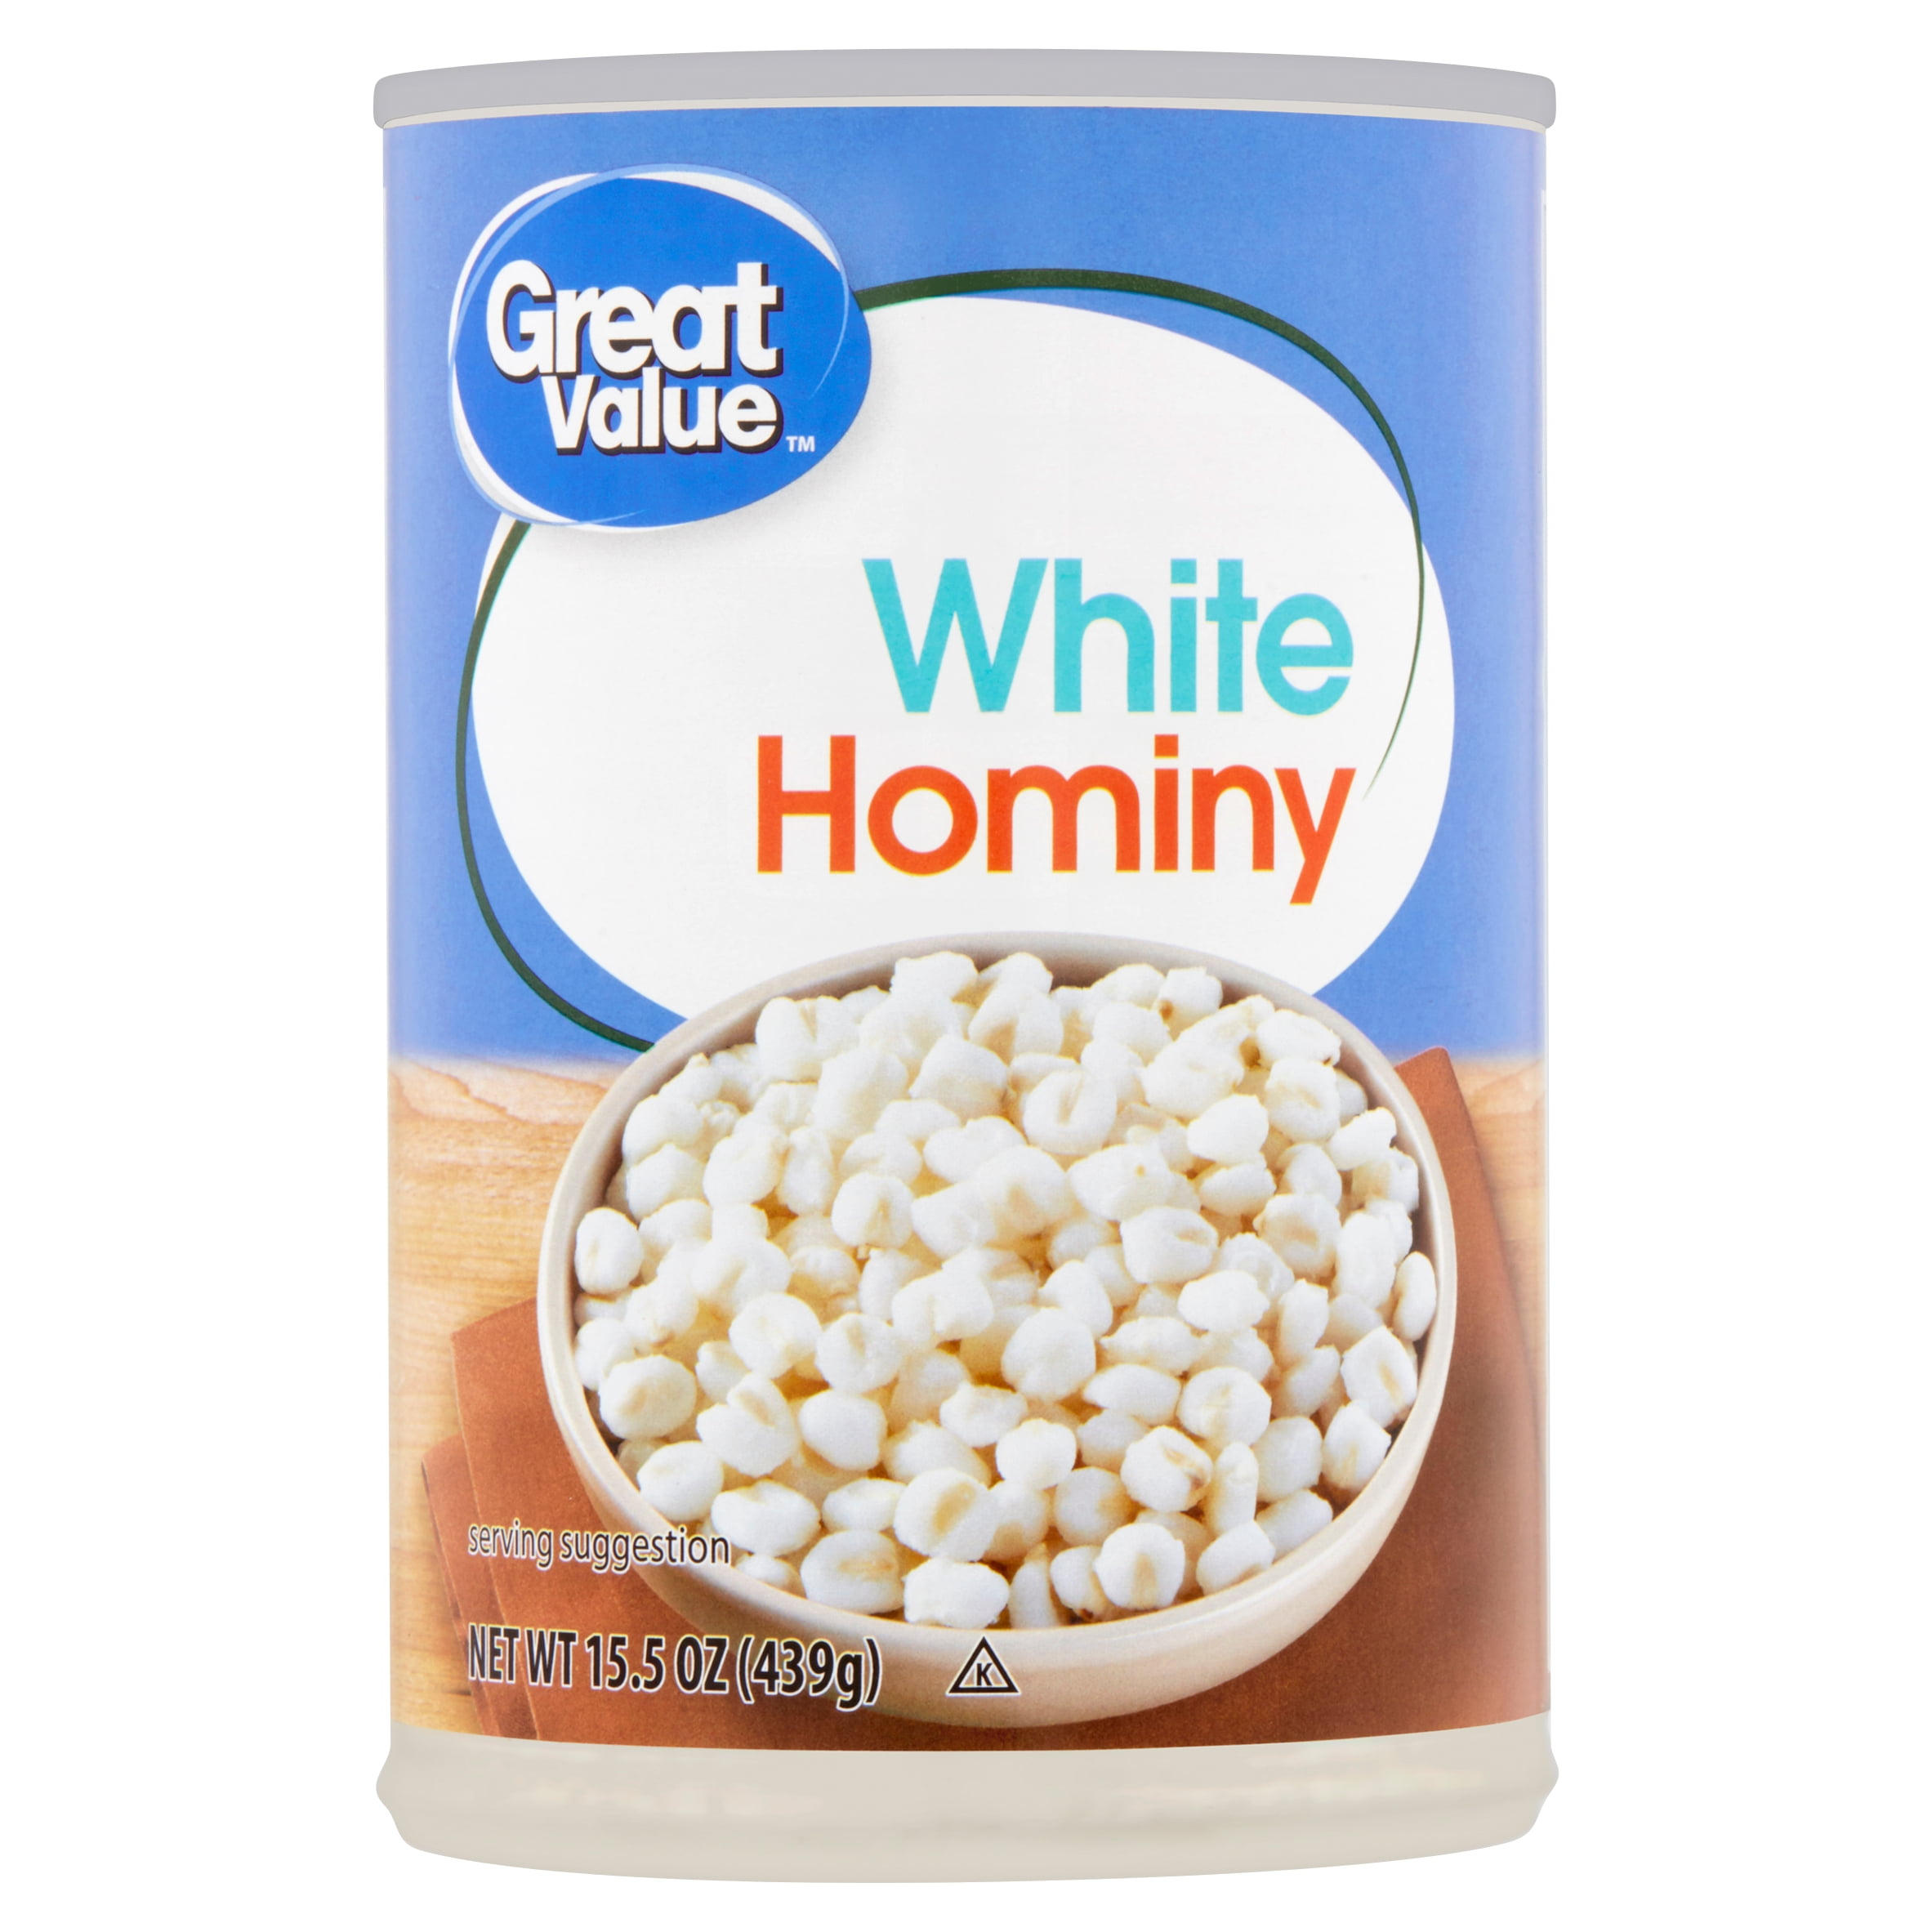 Great Value Canned White Hominy Can, 15.5 oz